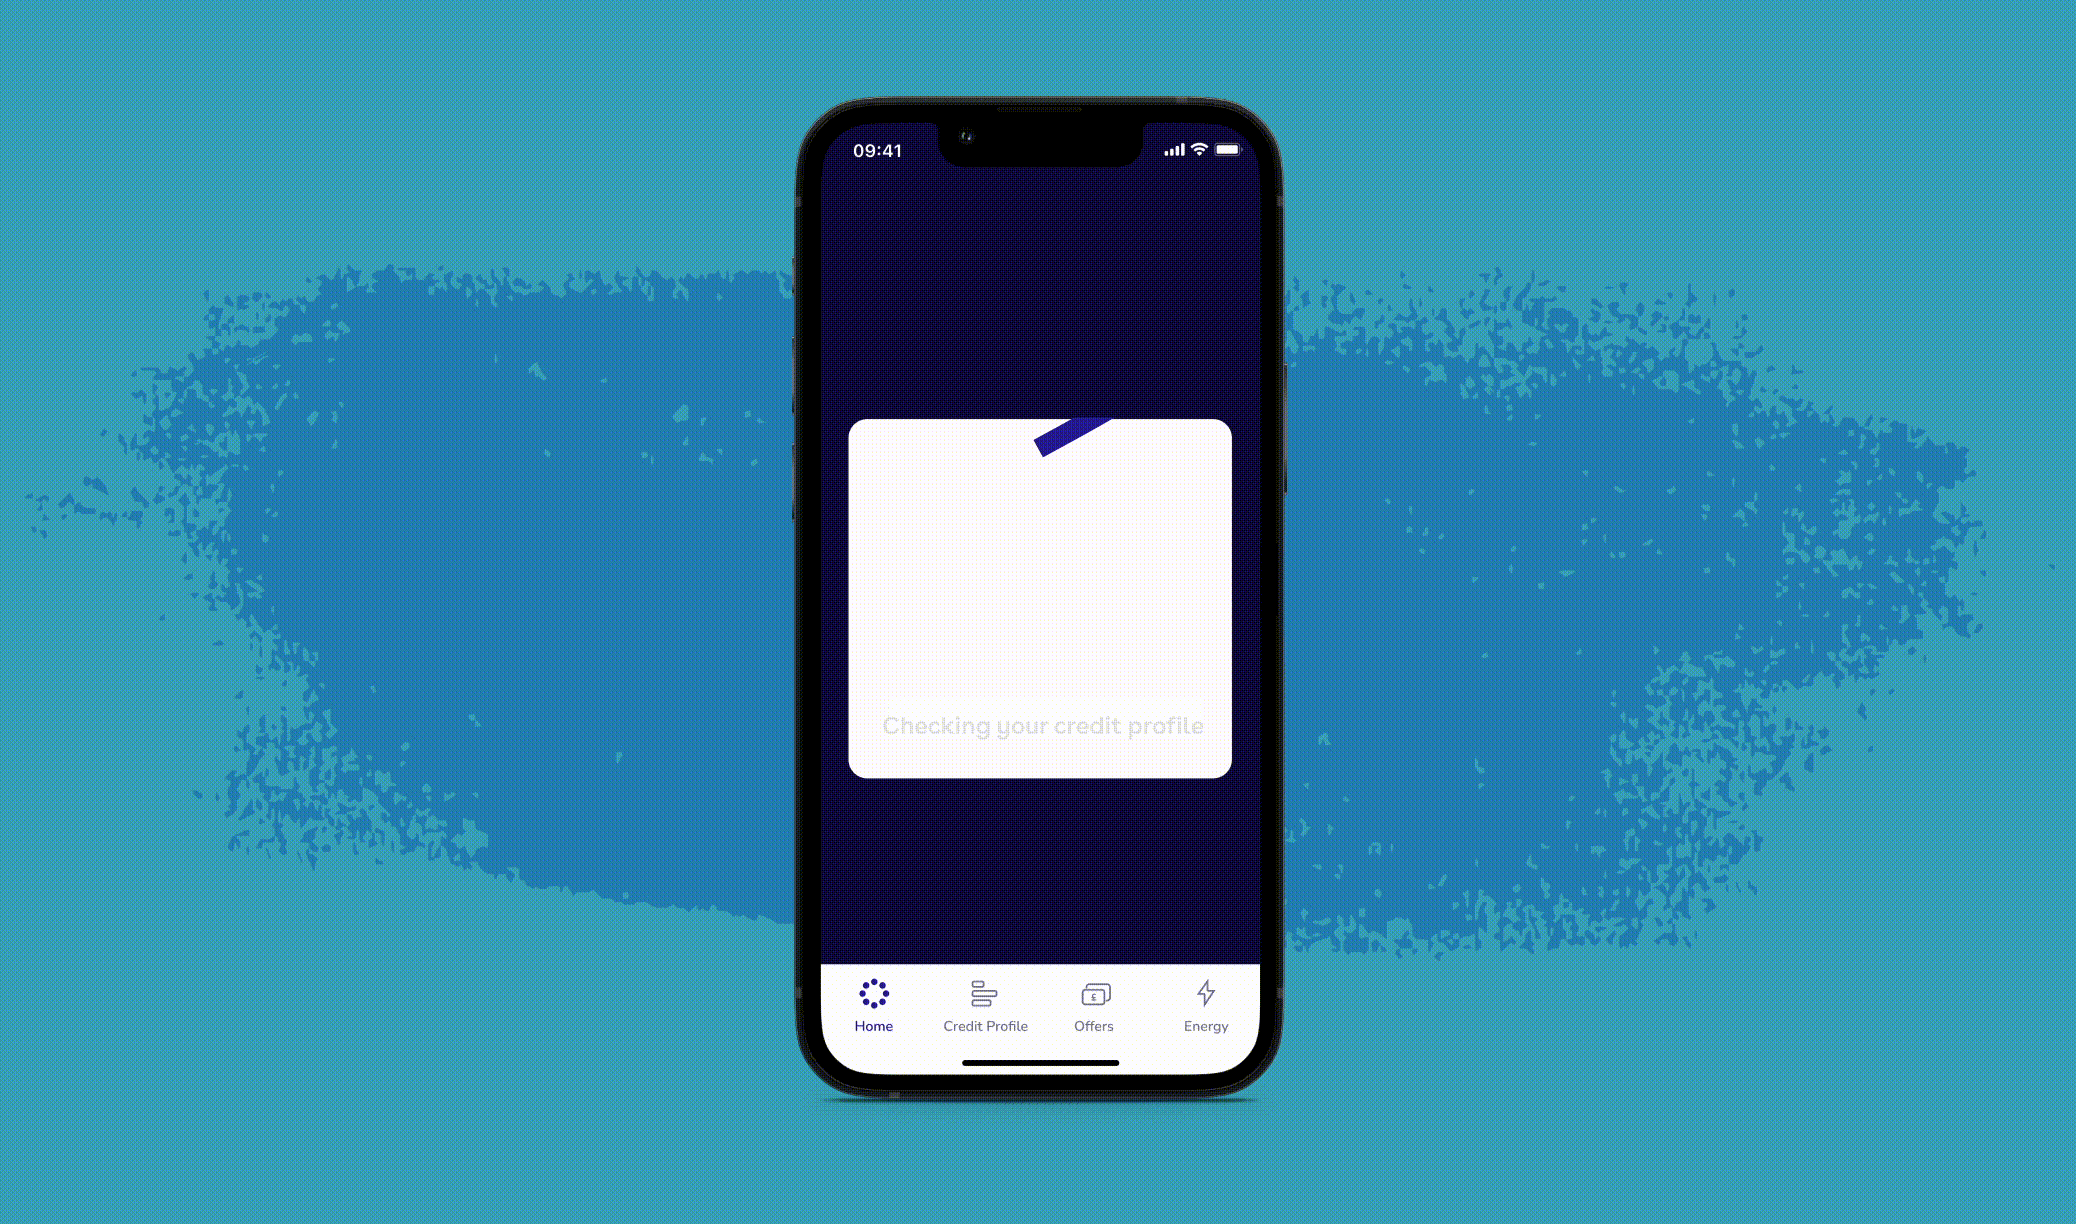 Loading animation in a phone screen